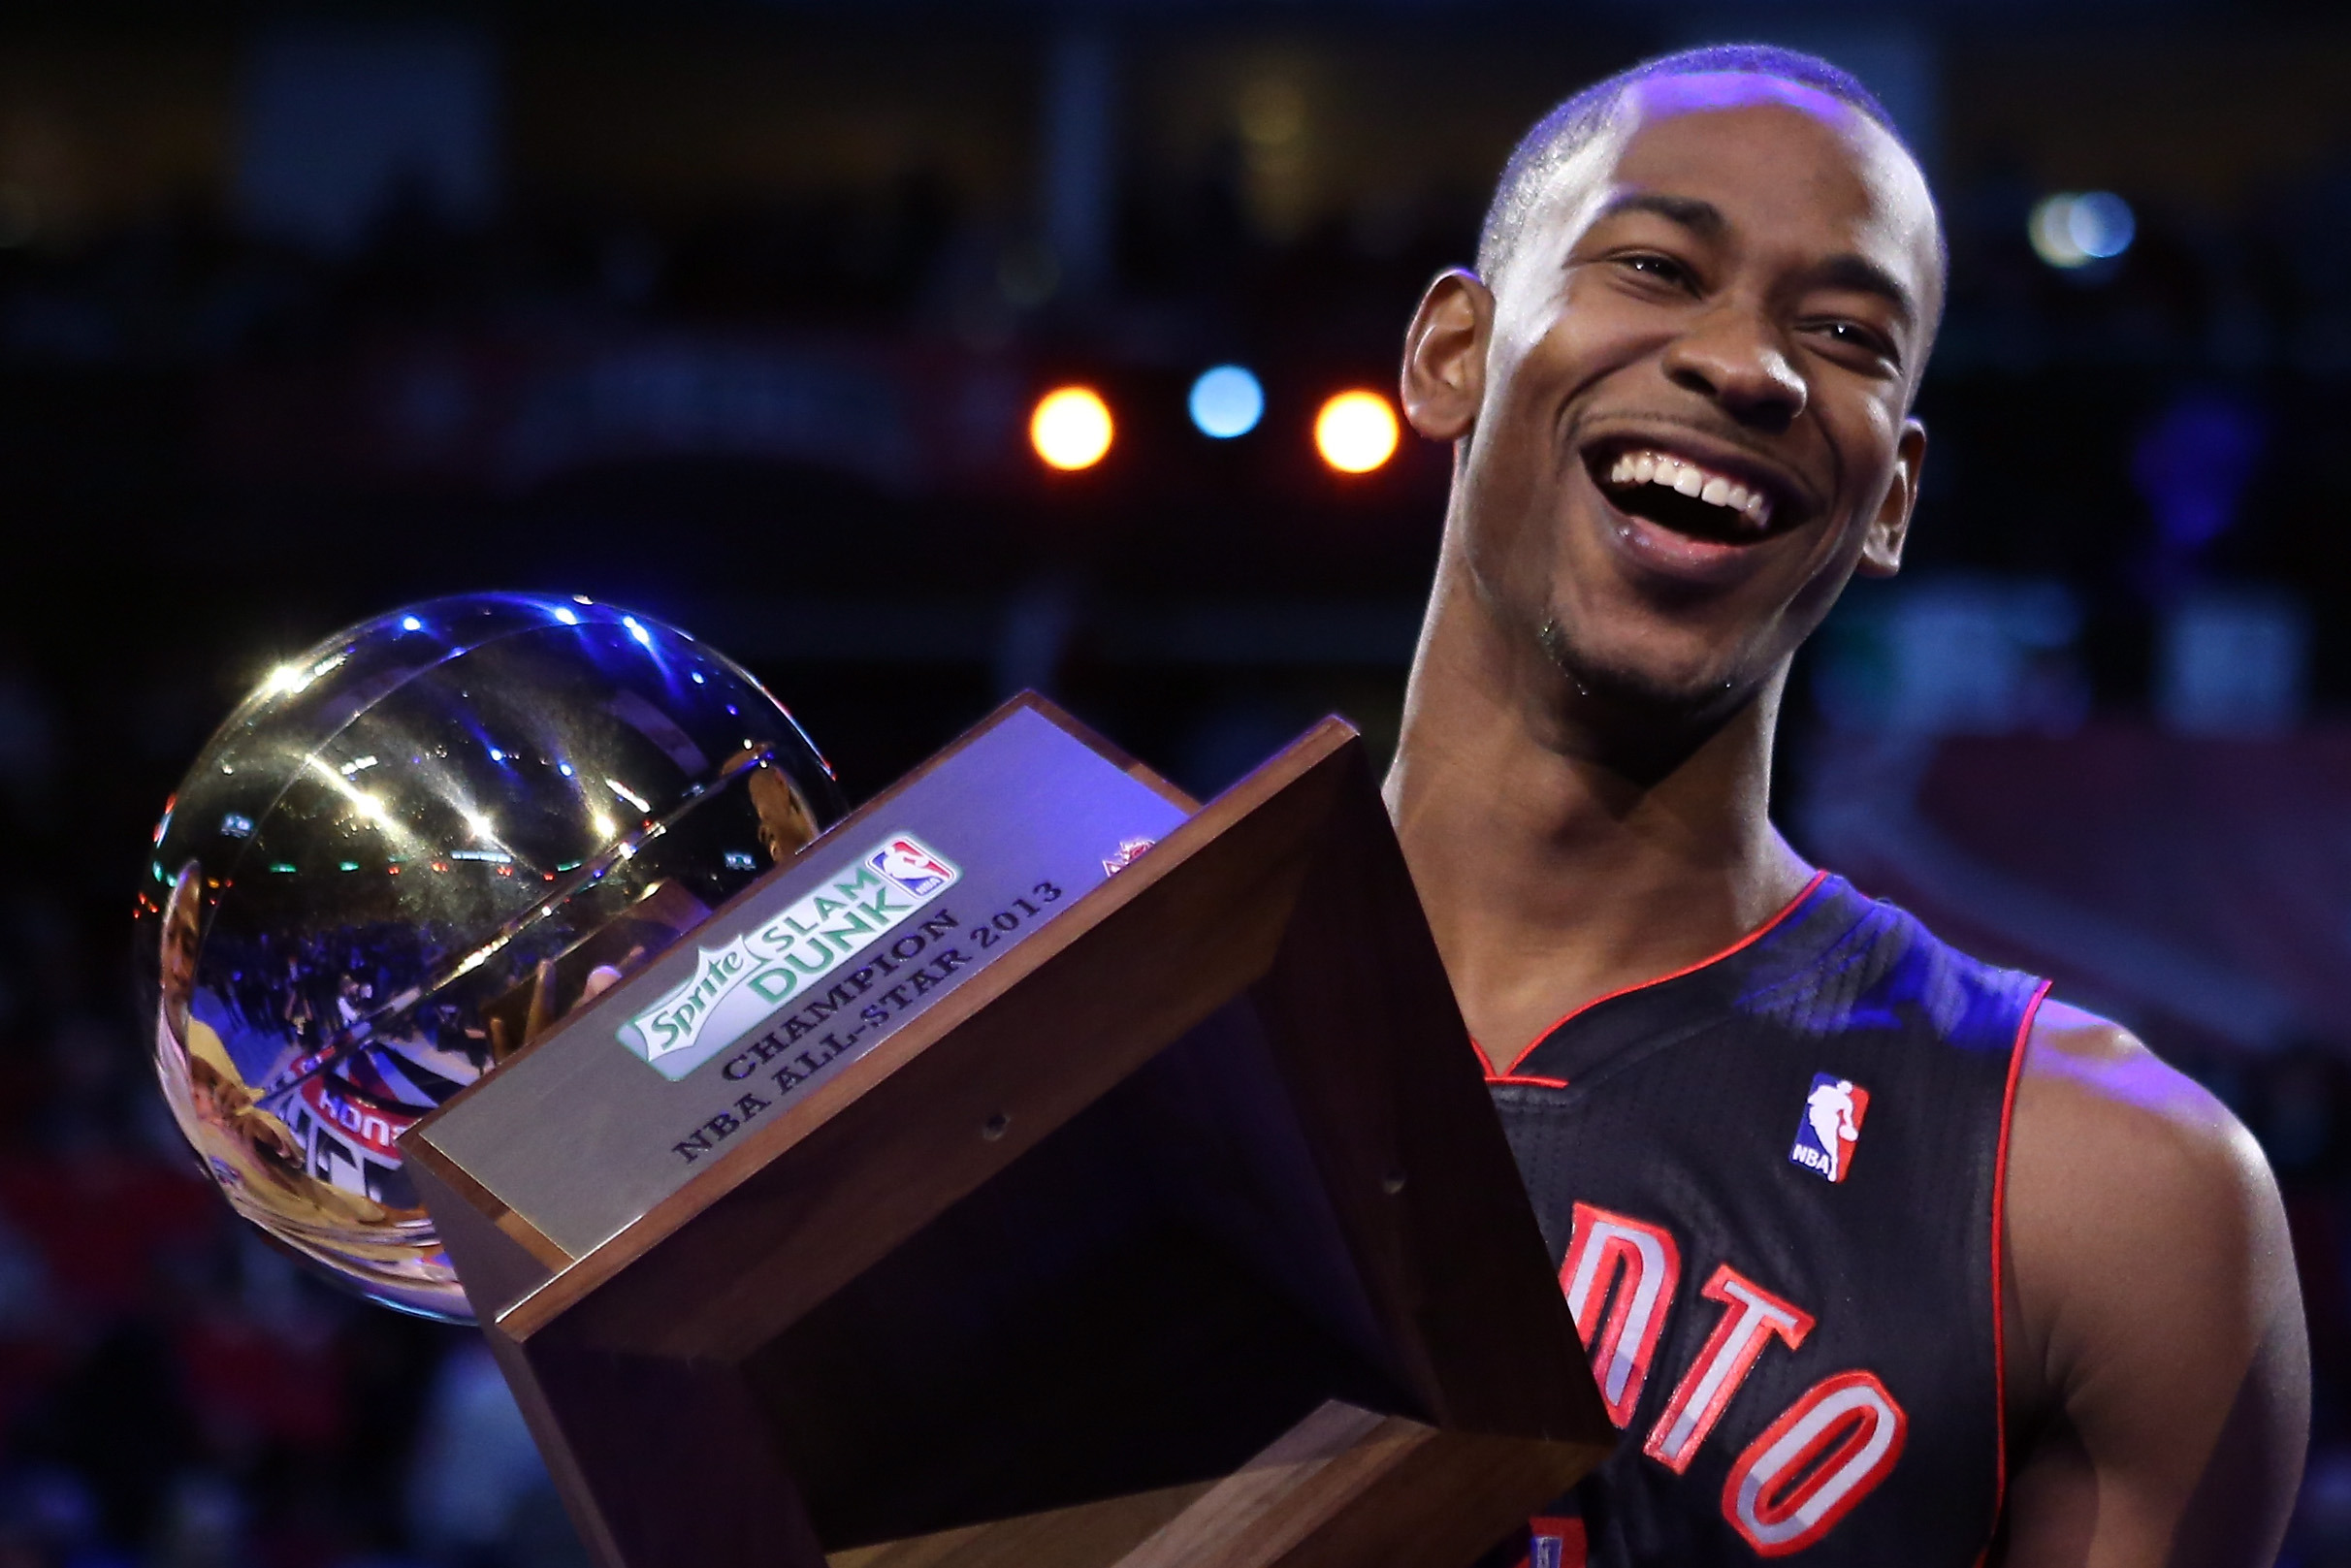 2013 NBA Slam Dunk Contest: Terrence Ross channels Vince Carter